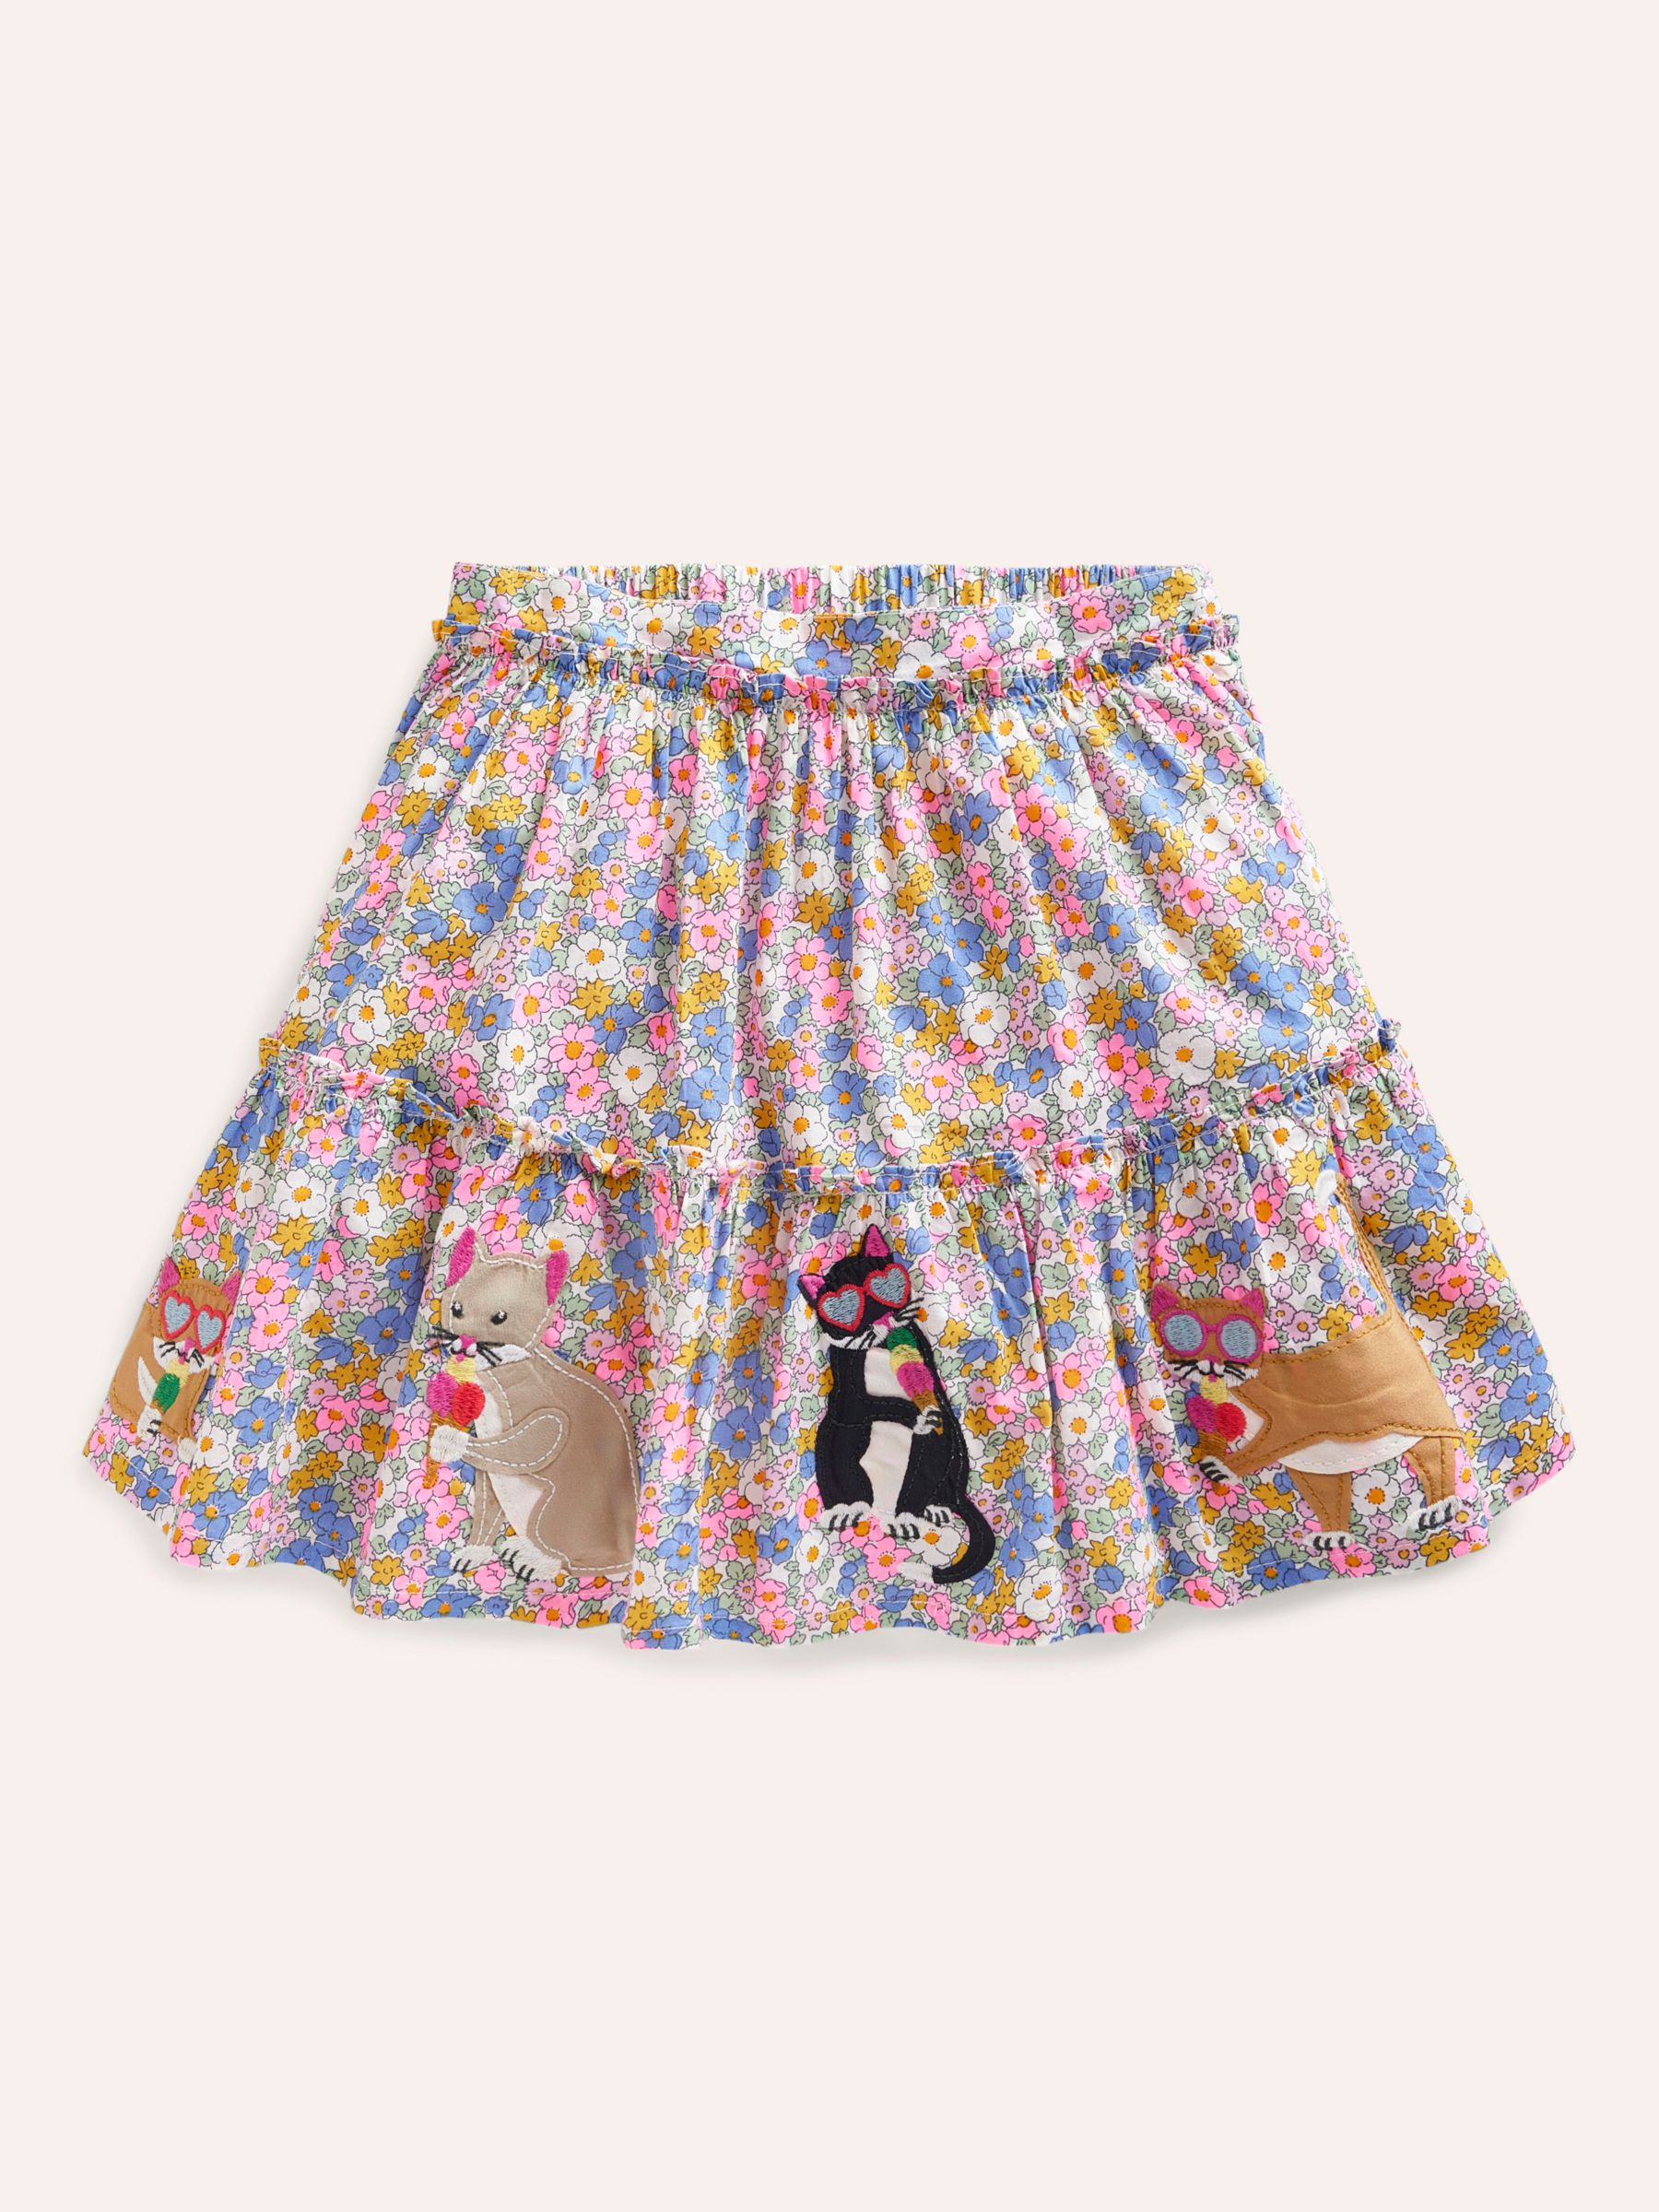 Mini Boden Kids' Cat Applique Floral Skirt, Pink Nautical, 2-3 years